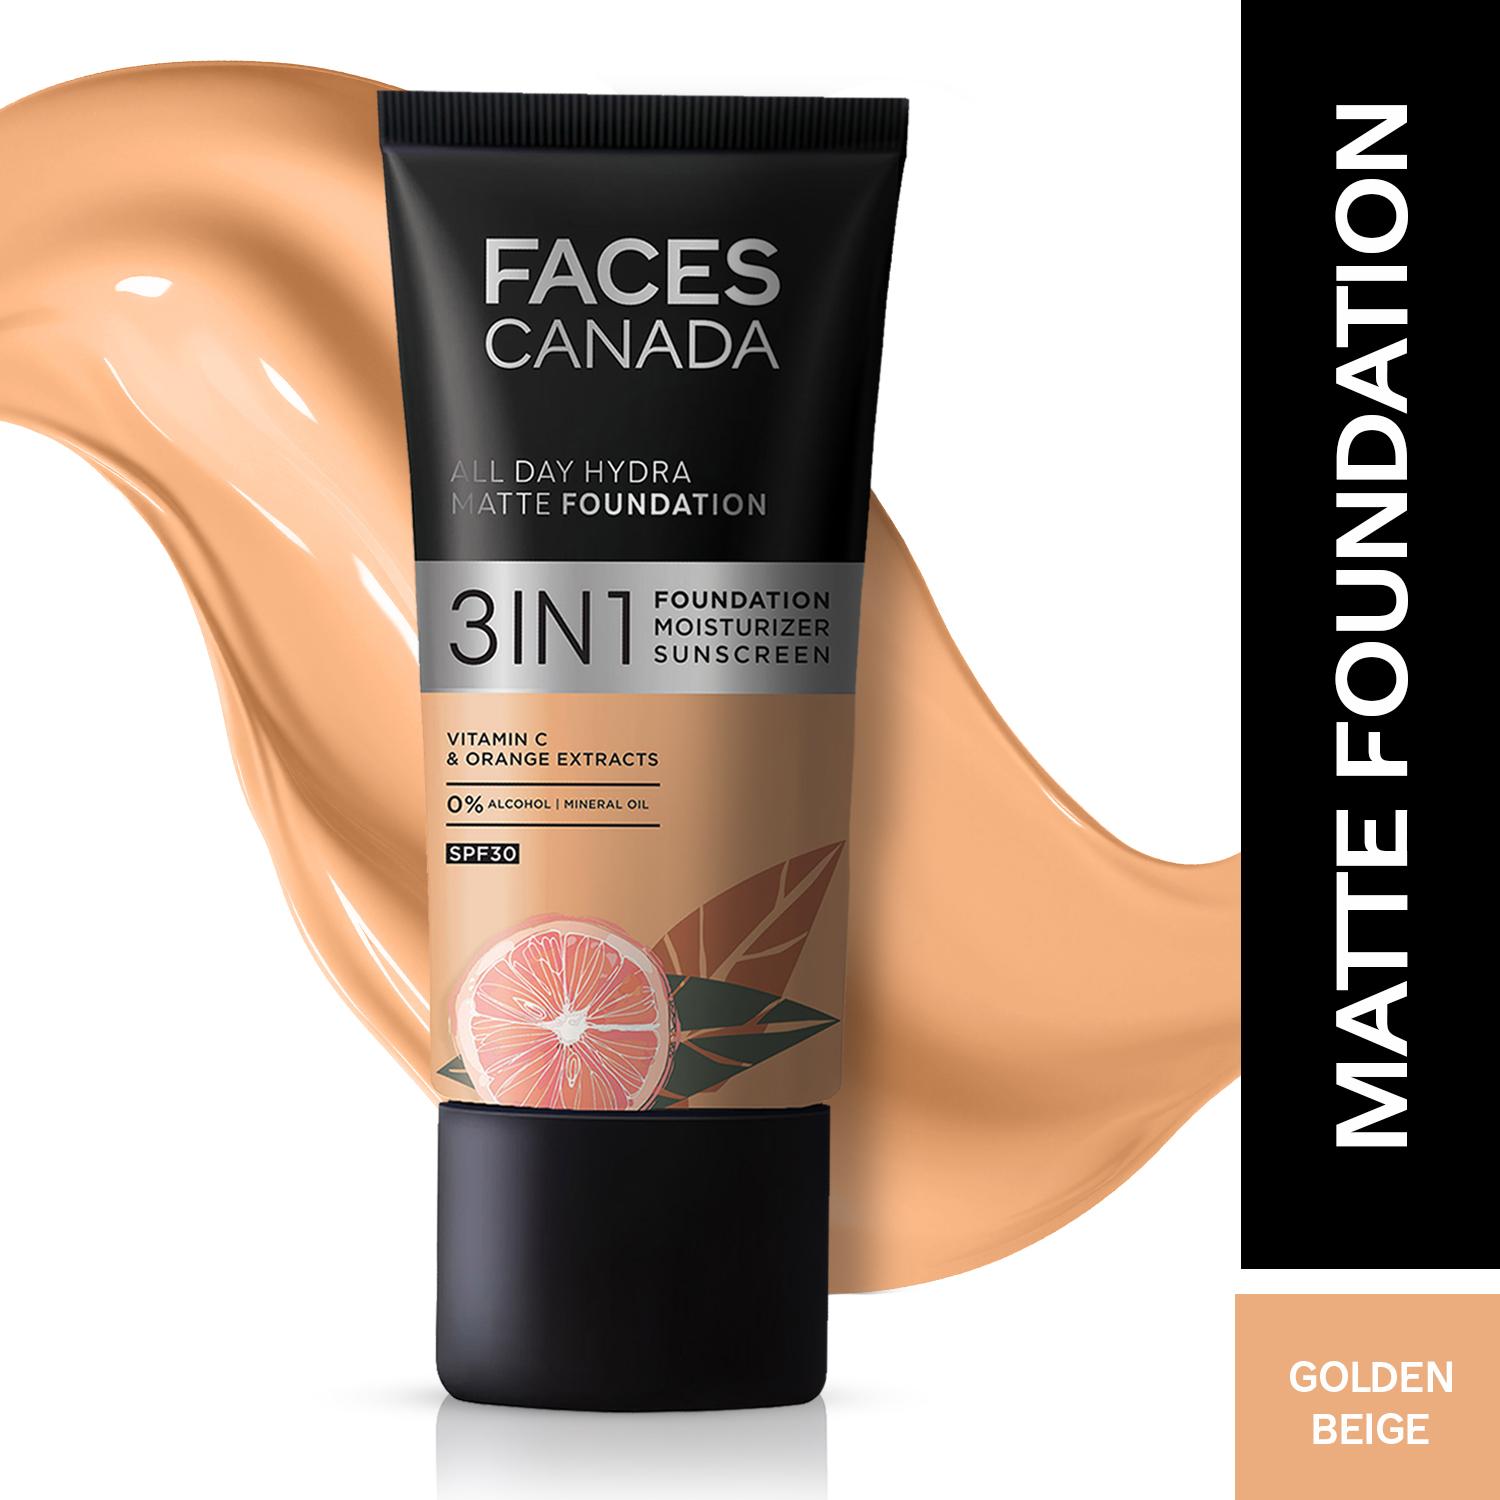 Faces Canada | Faces Canada 3in1 All Day Hydra Matte Foundation + Moisturizer + SPF 30 - Golden Beige 032 (25 ml)